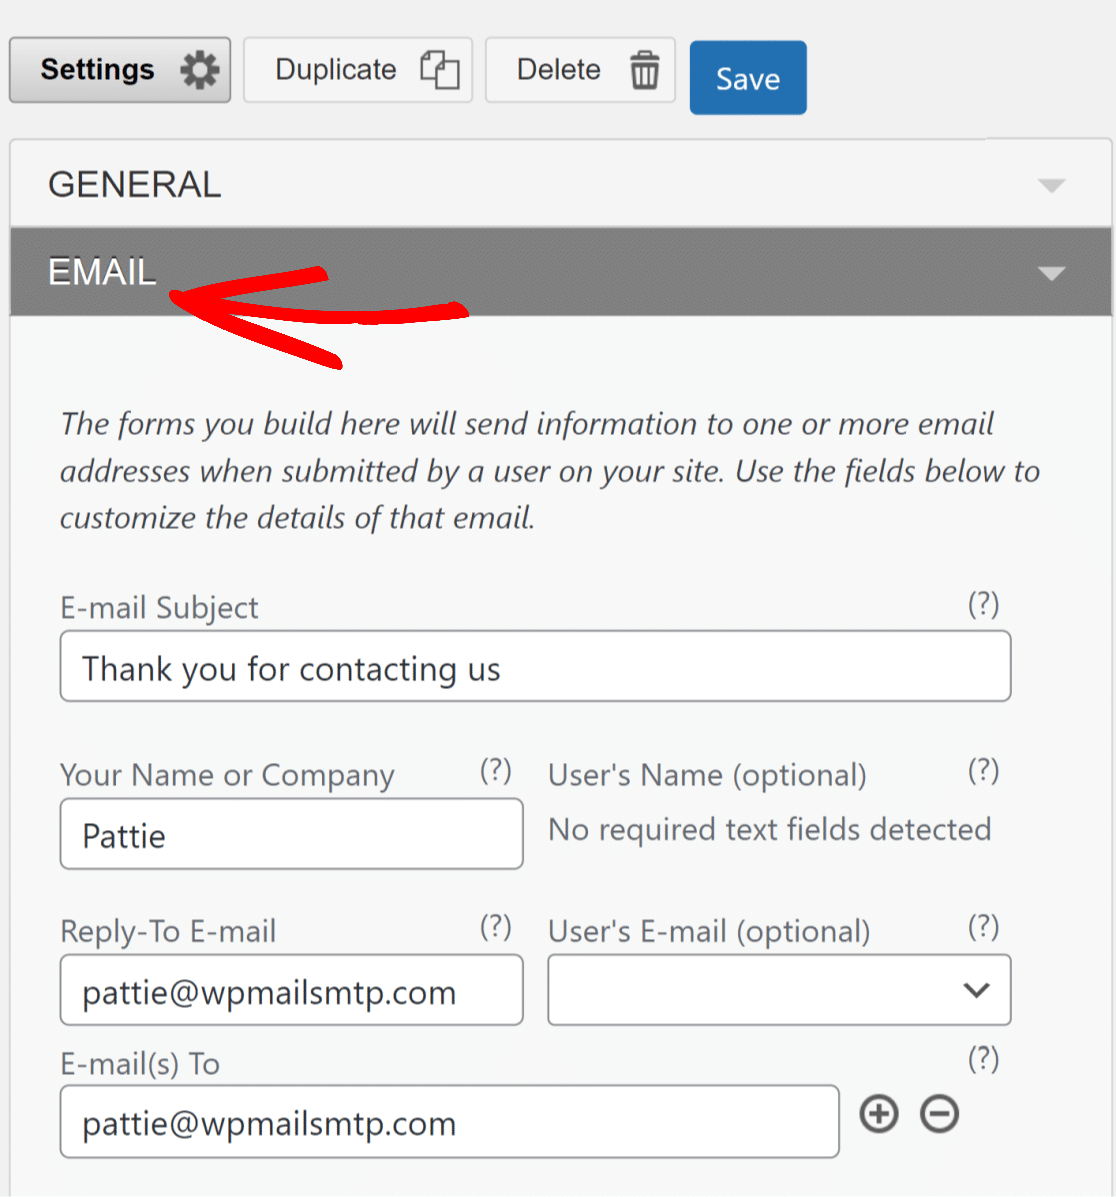 VFB email settings